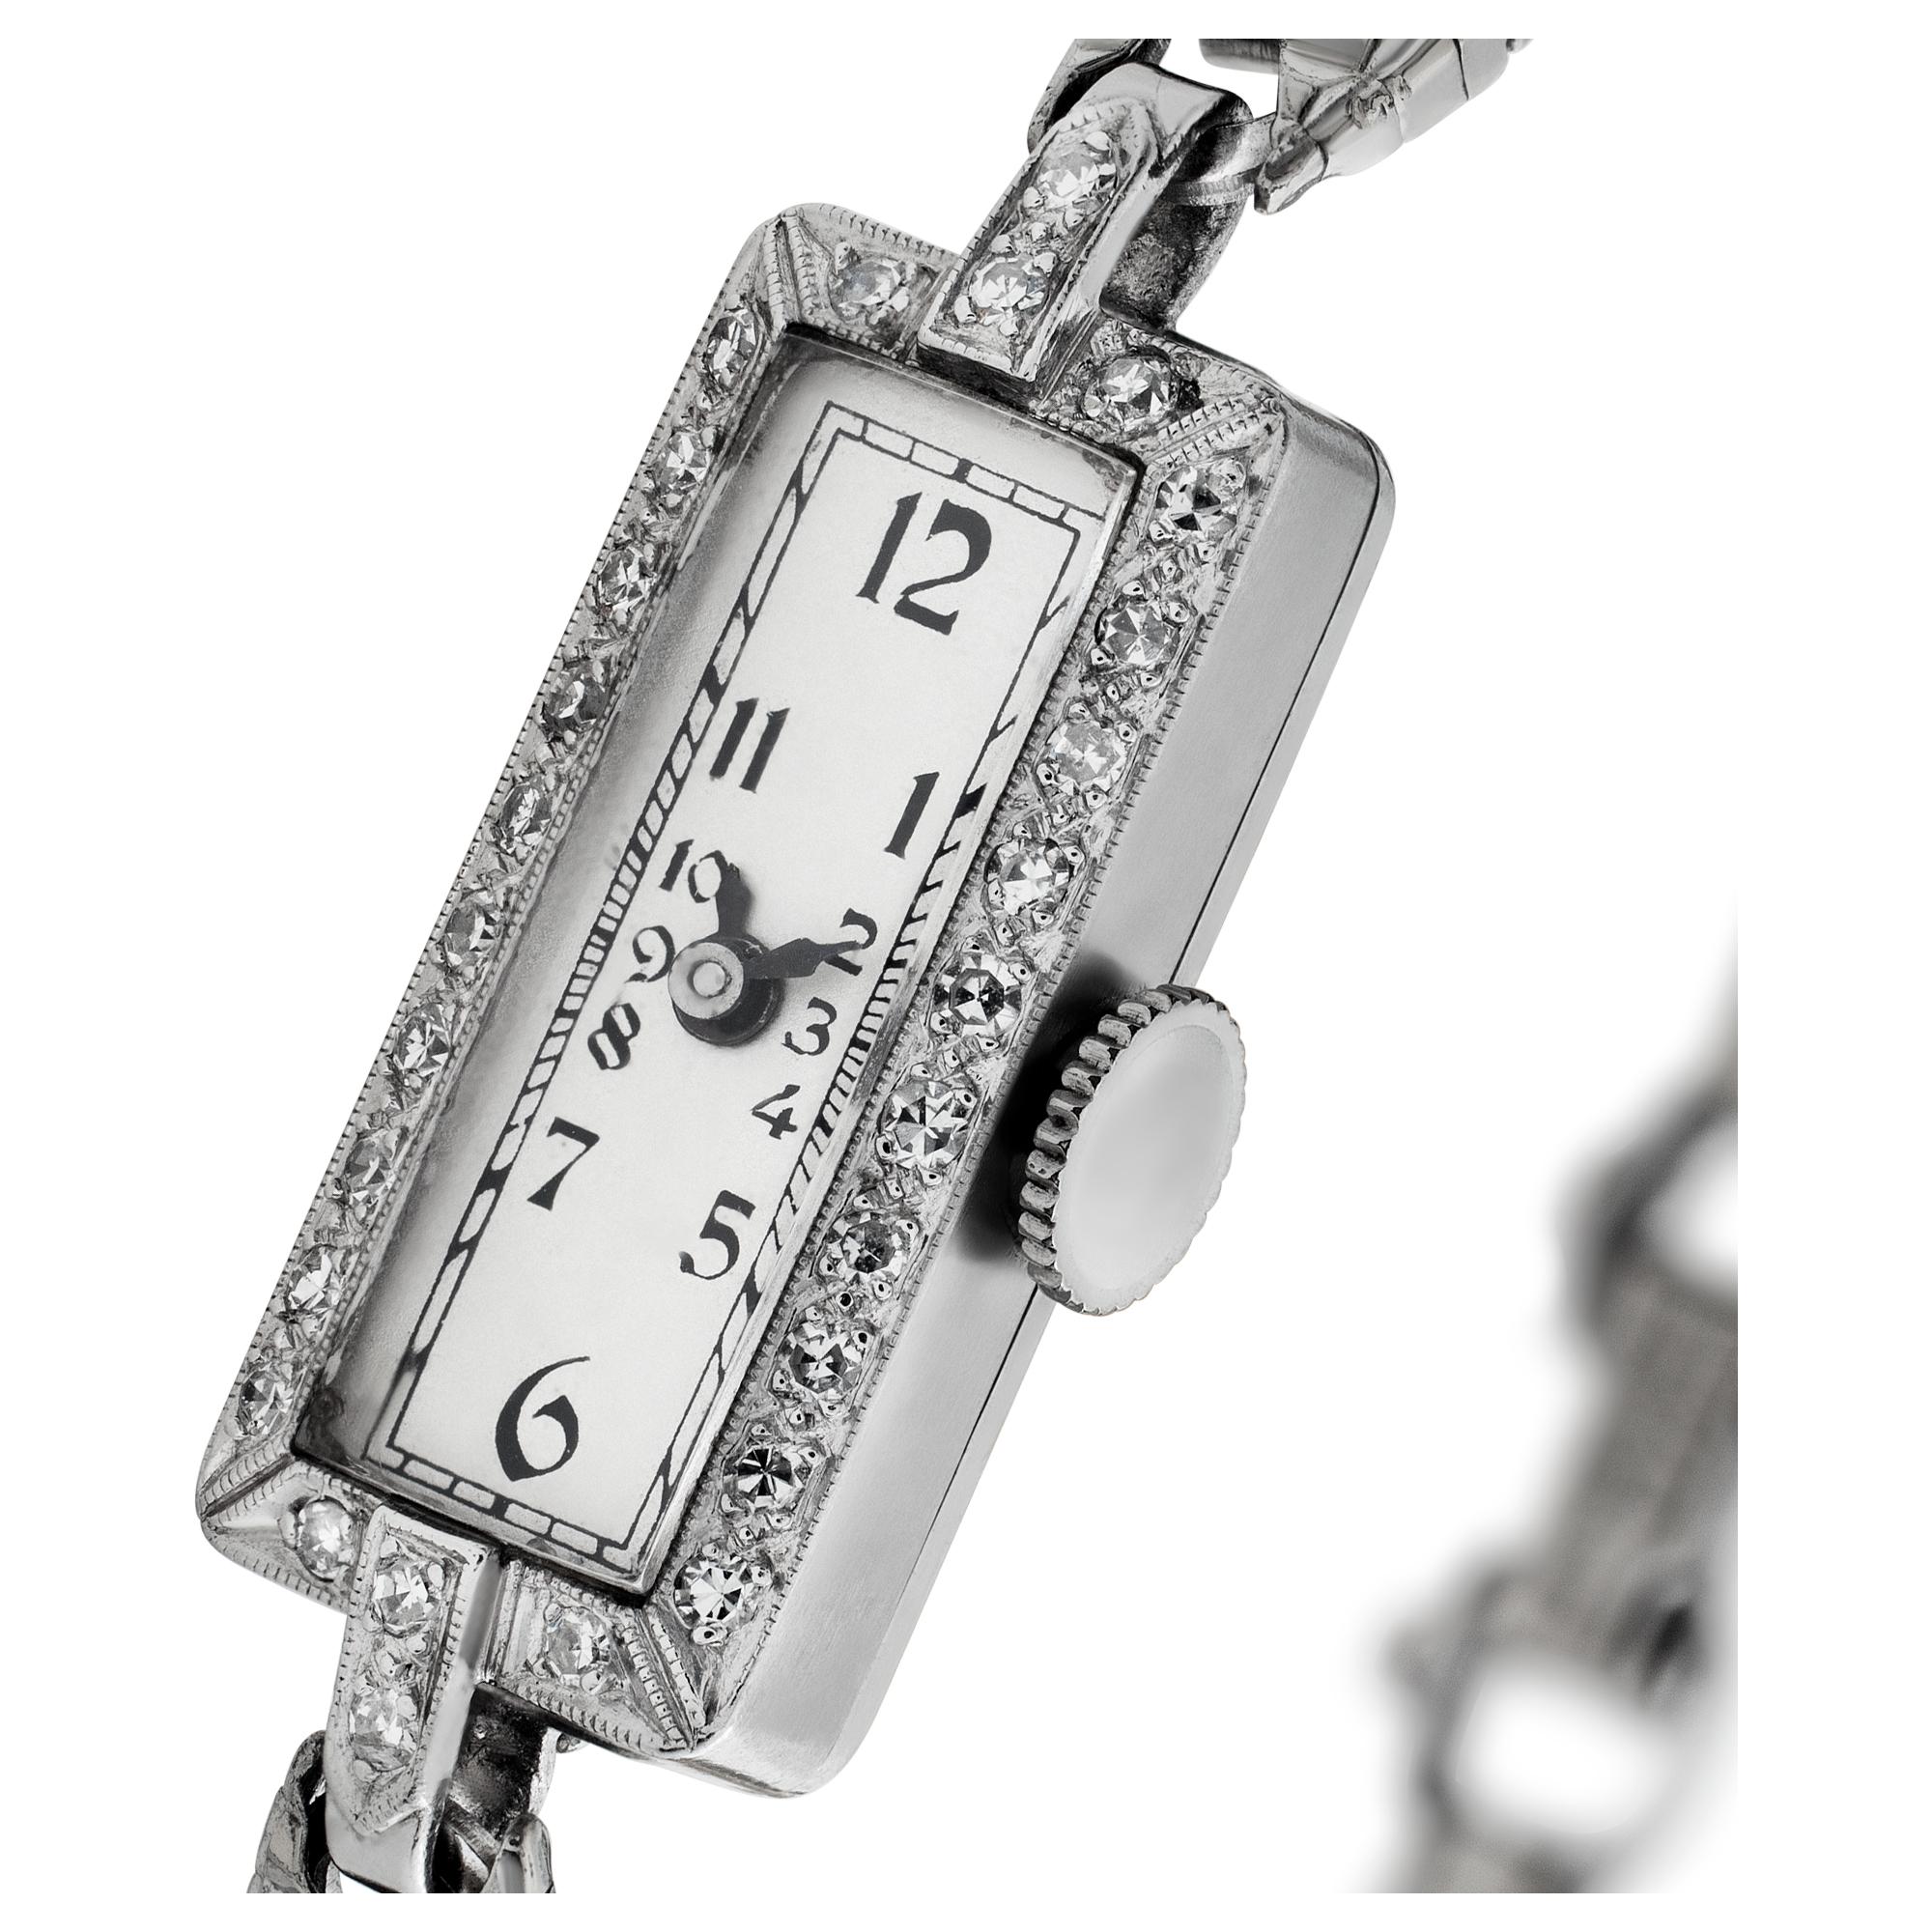 Vintage ladies Elgin in platinum with approx. 0.20 carats in G-H color, VS clarity  diamond bezel and gold-filled bracelet. Manual. With security chain on the clasp. Circa 1930s. Fine Pre-owned Elgin Watch. Certified preowned Vintage Elgin watch is